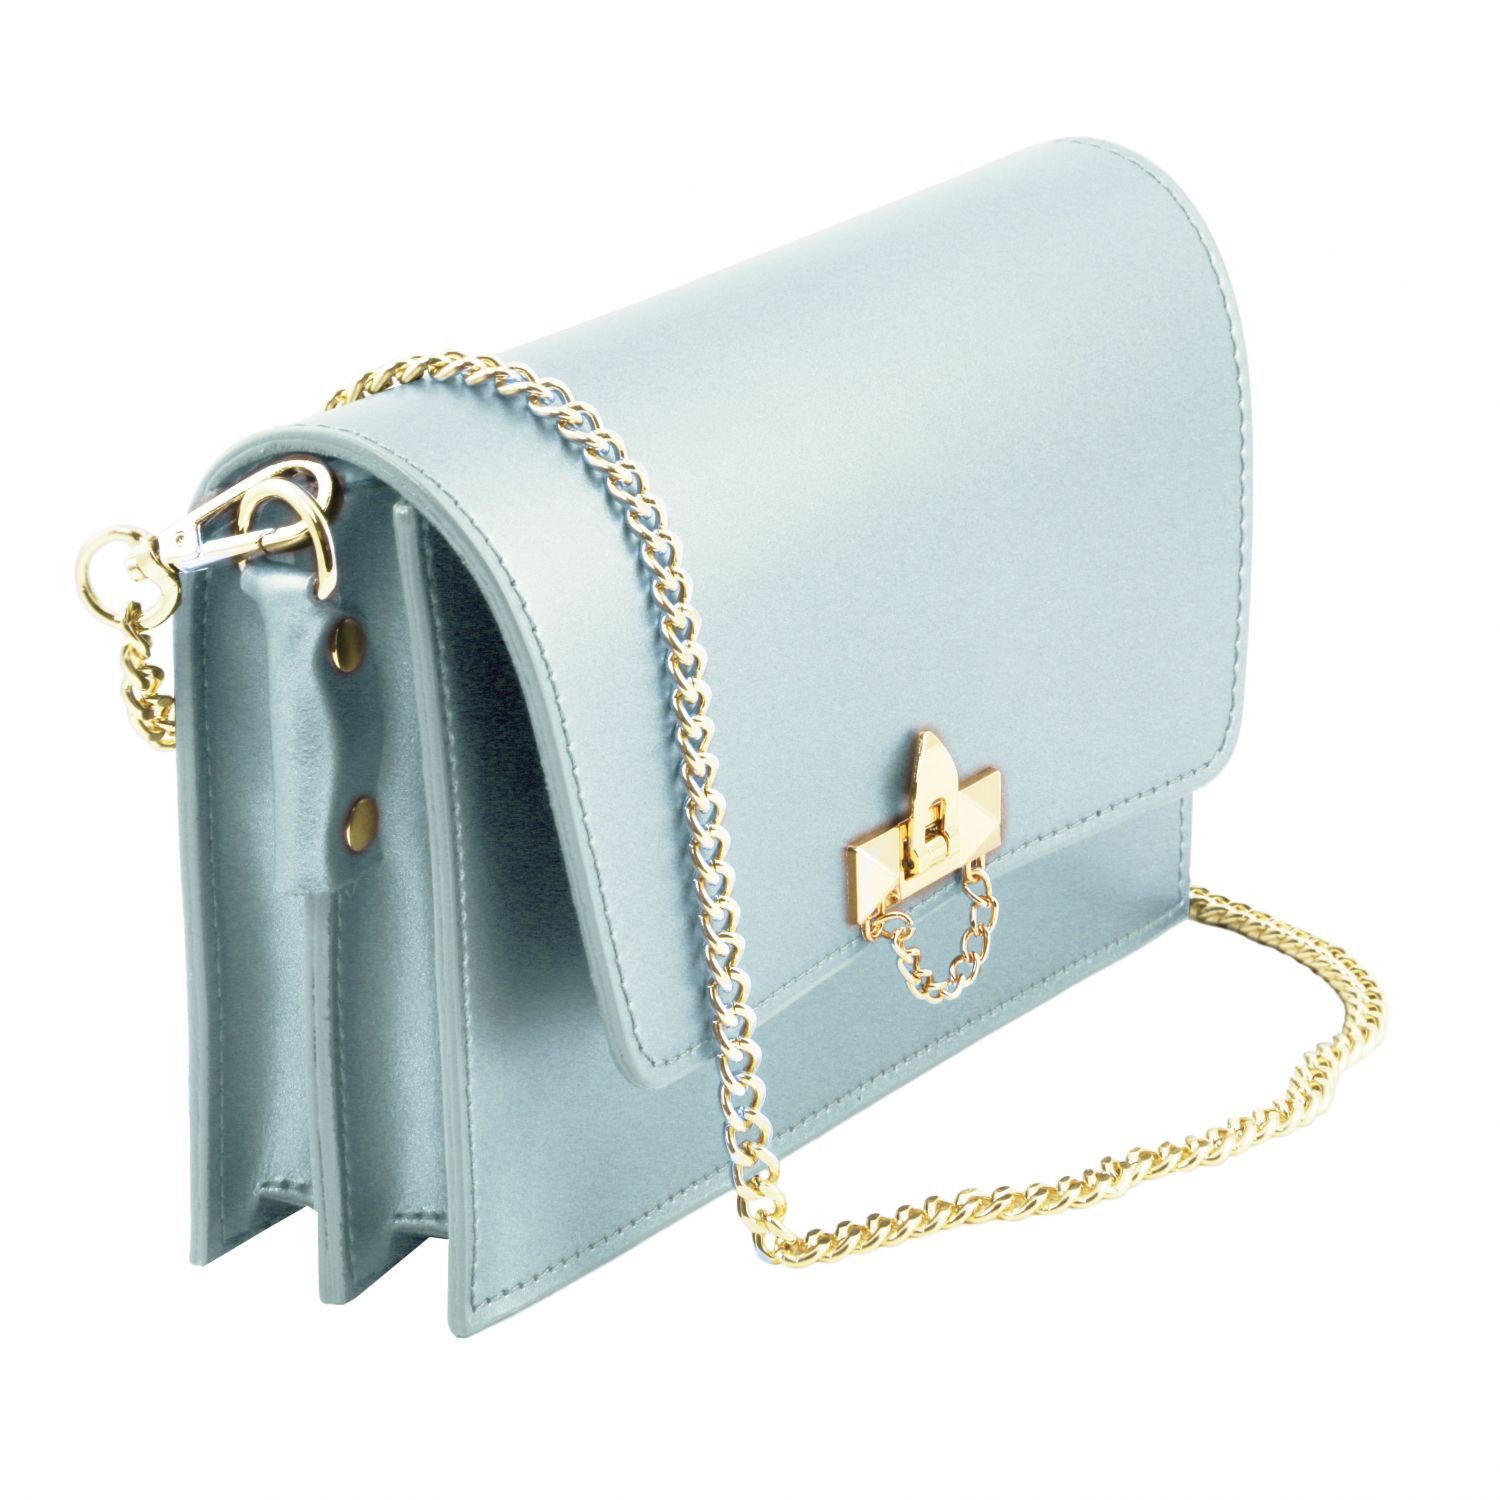 TL Bag Metallic Leather Clutch With Chain Strap Light Blue TL141654